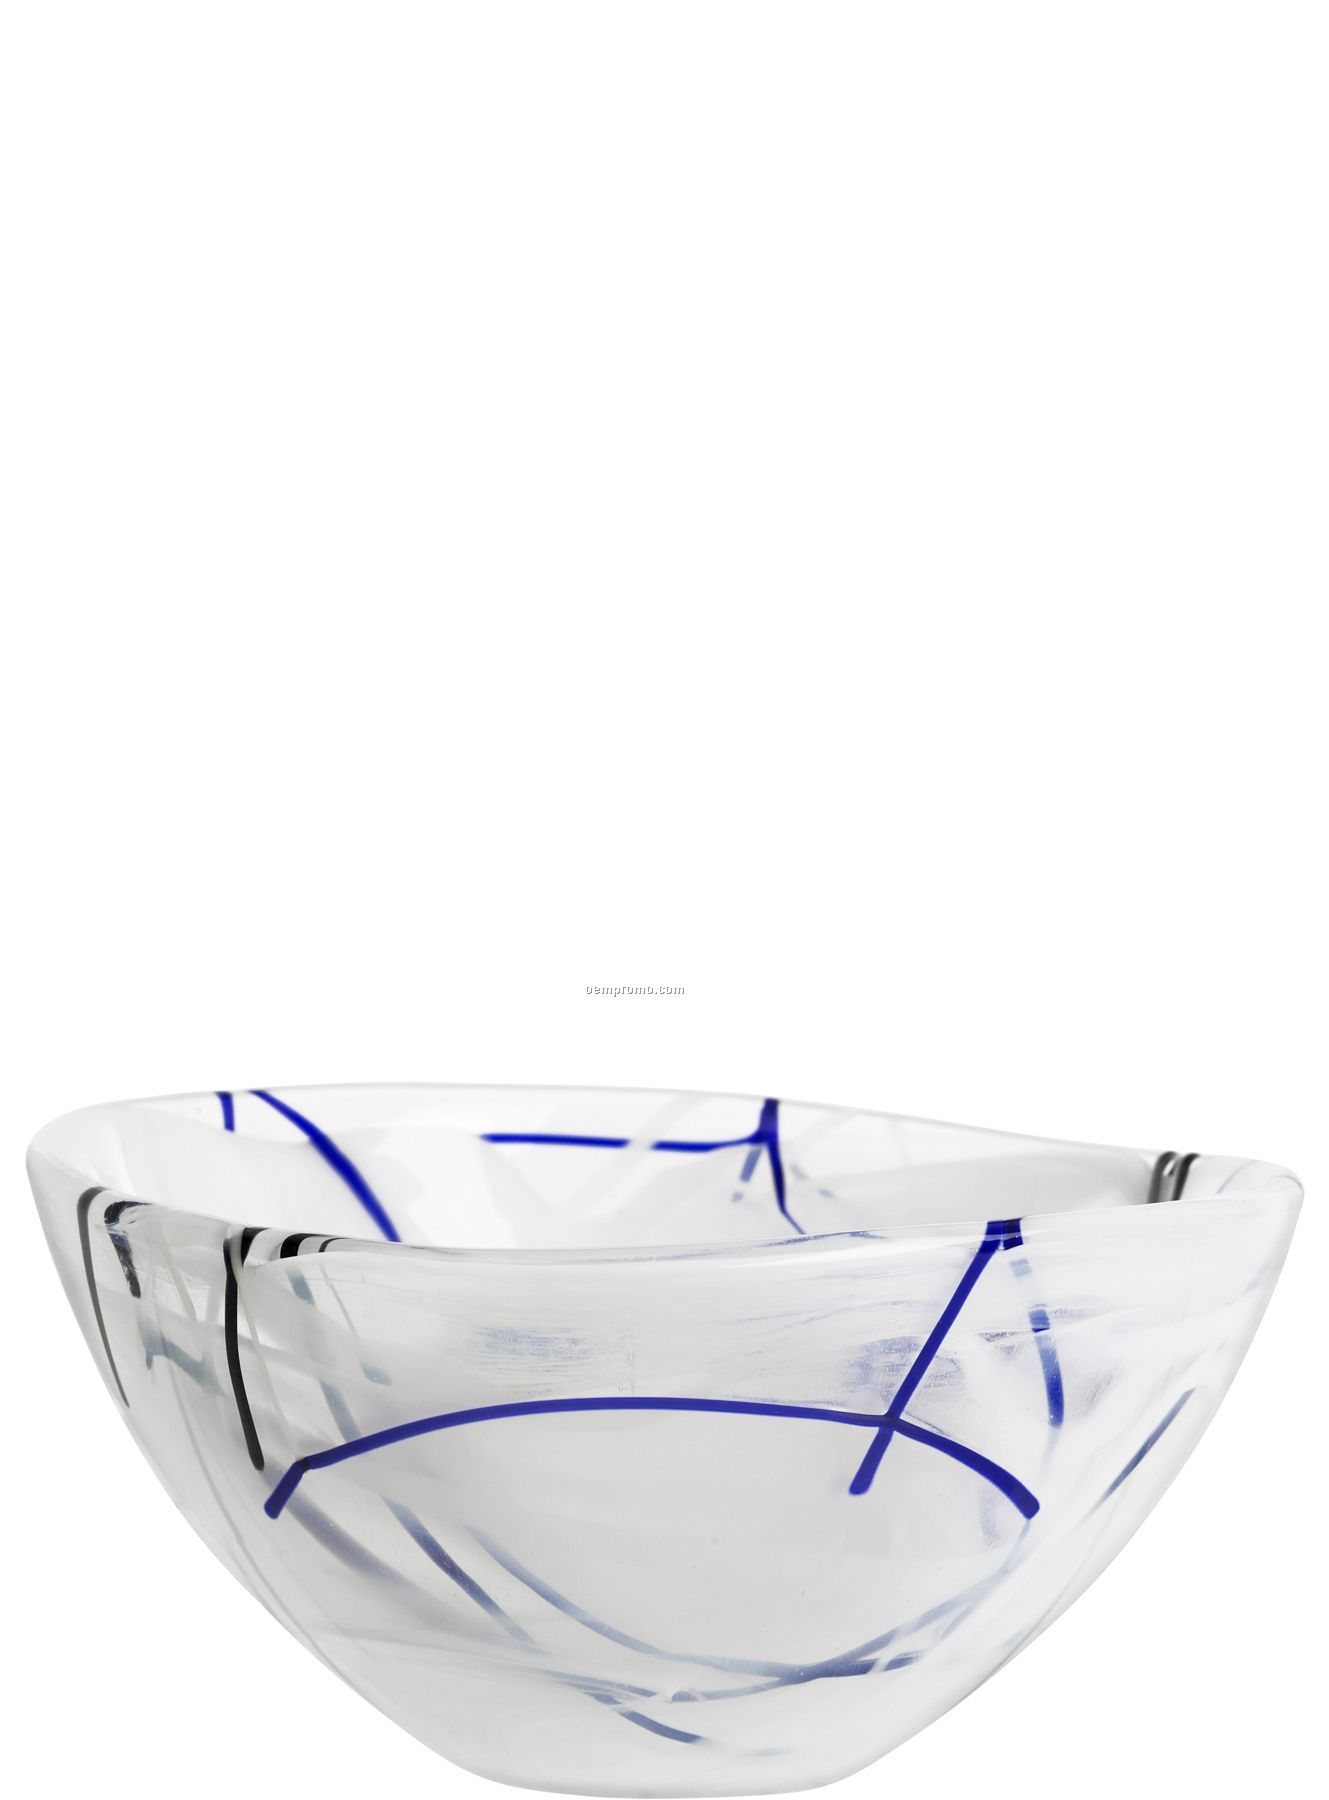 Contrast Small Swirl Crystal Bowl By Anna Ehrner (White)